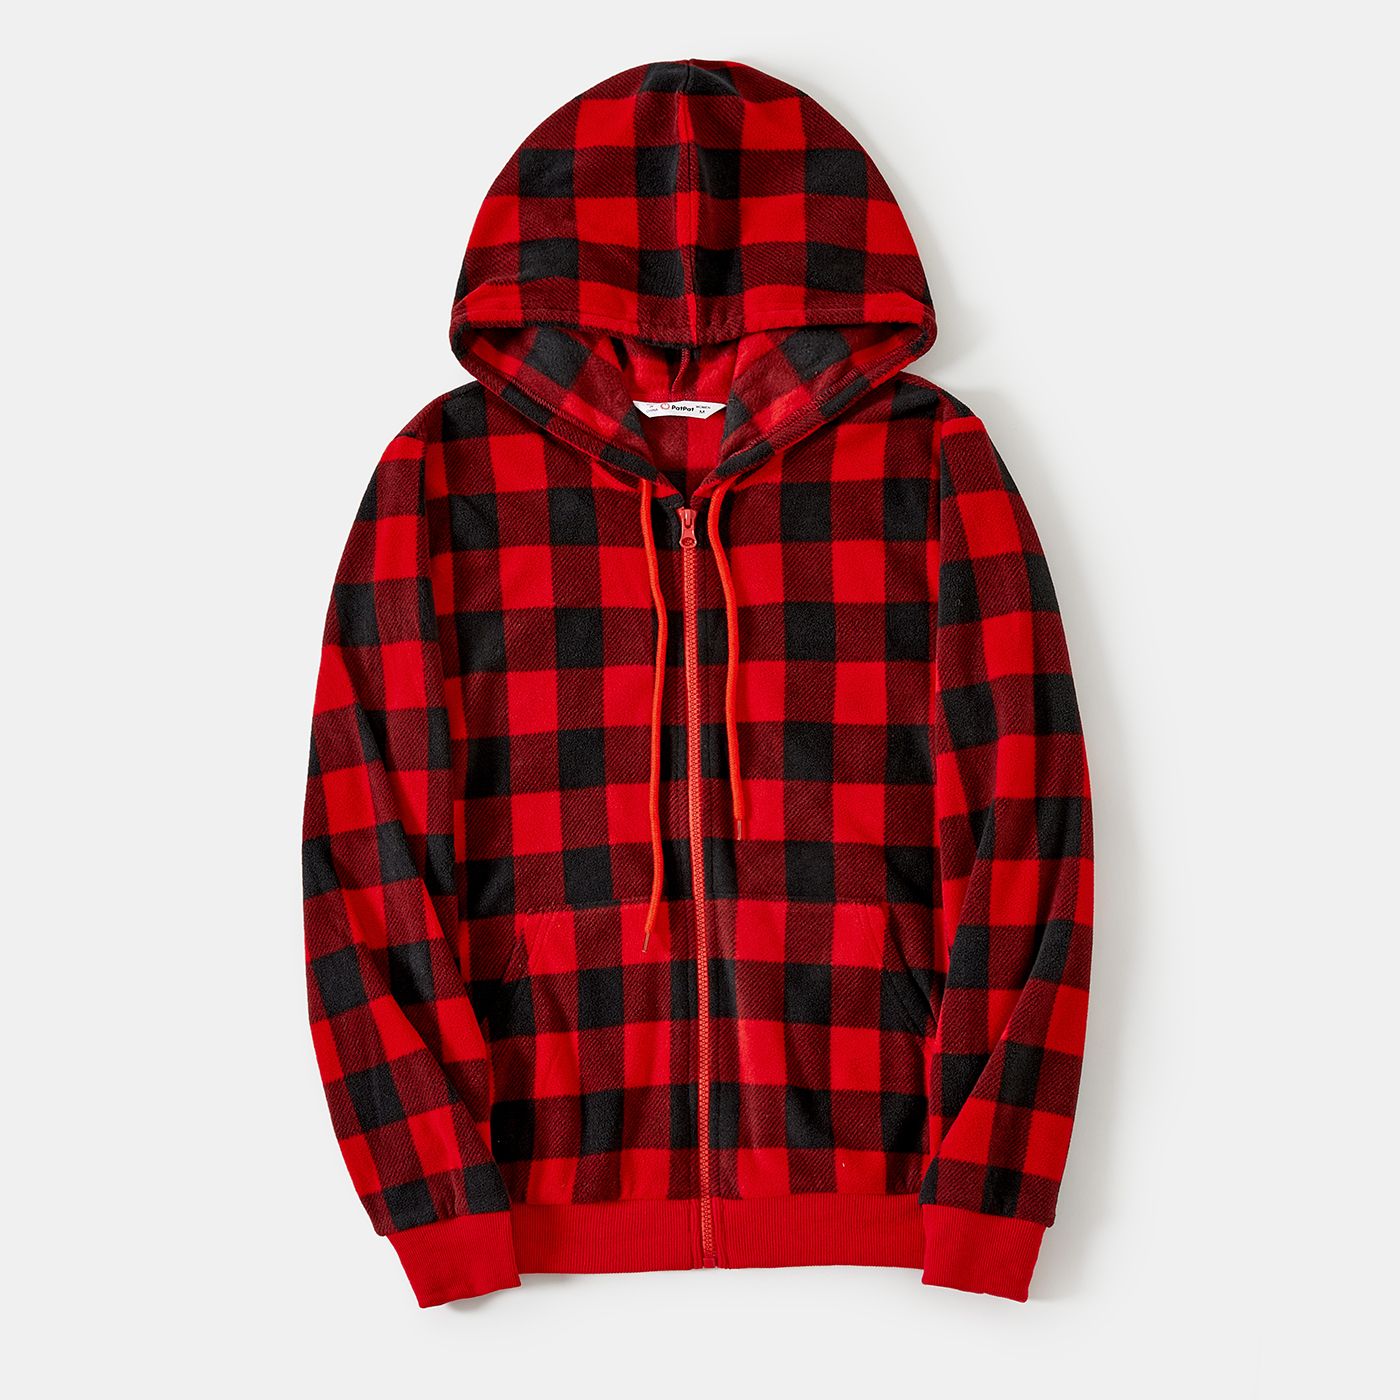 Christmas Family Matching Red And Black Plaid Hooded Drawstring Fleece Long-sleeve Coat Top